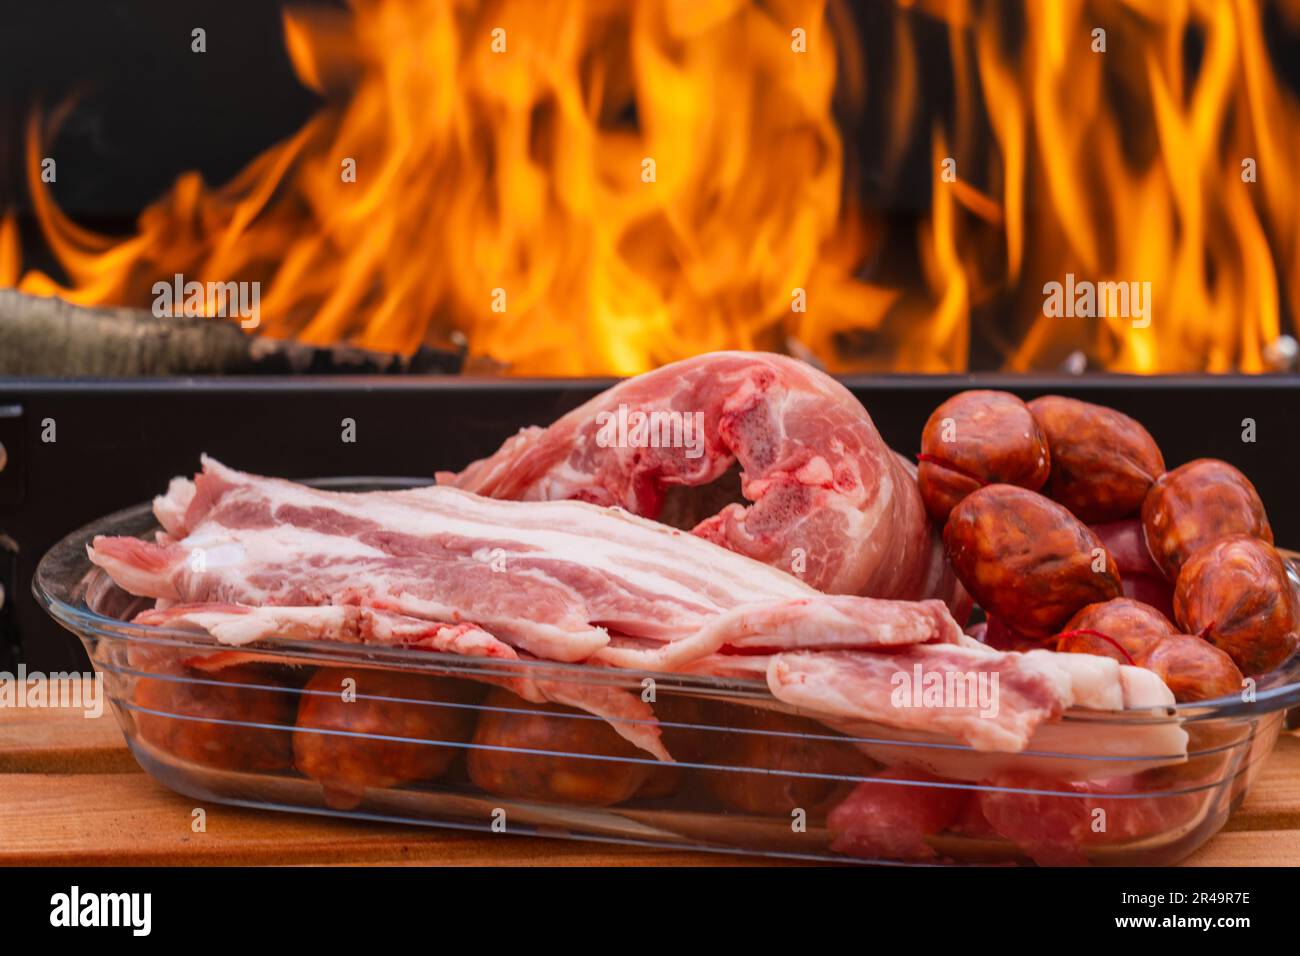 An array of raw meats and sausage near a burning grill with flames Stock Photo